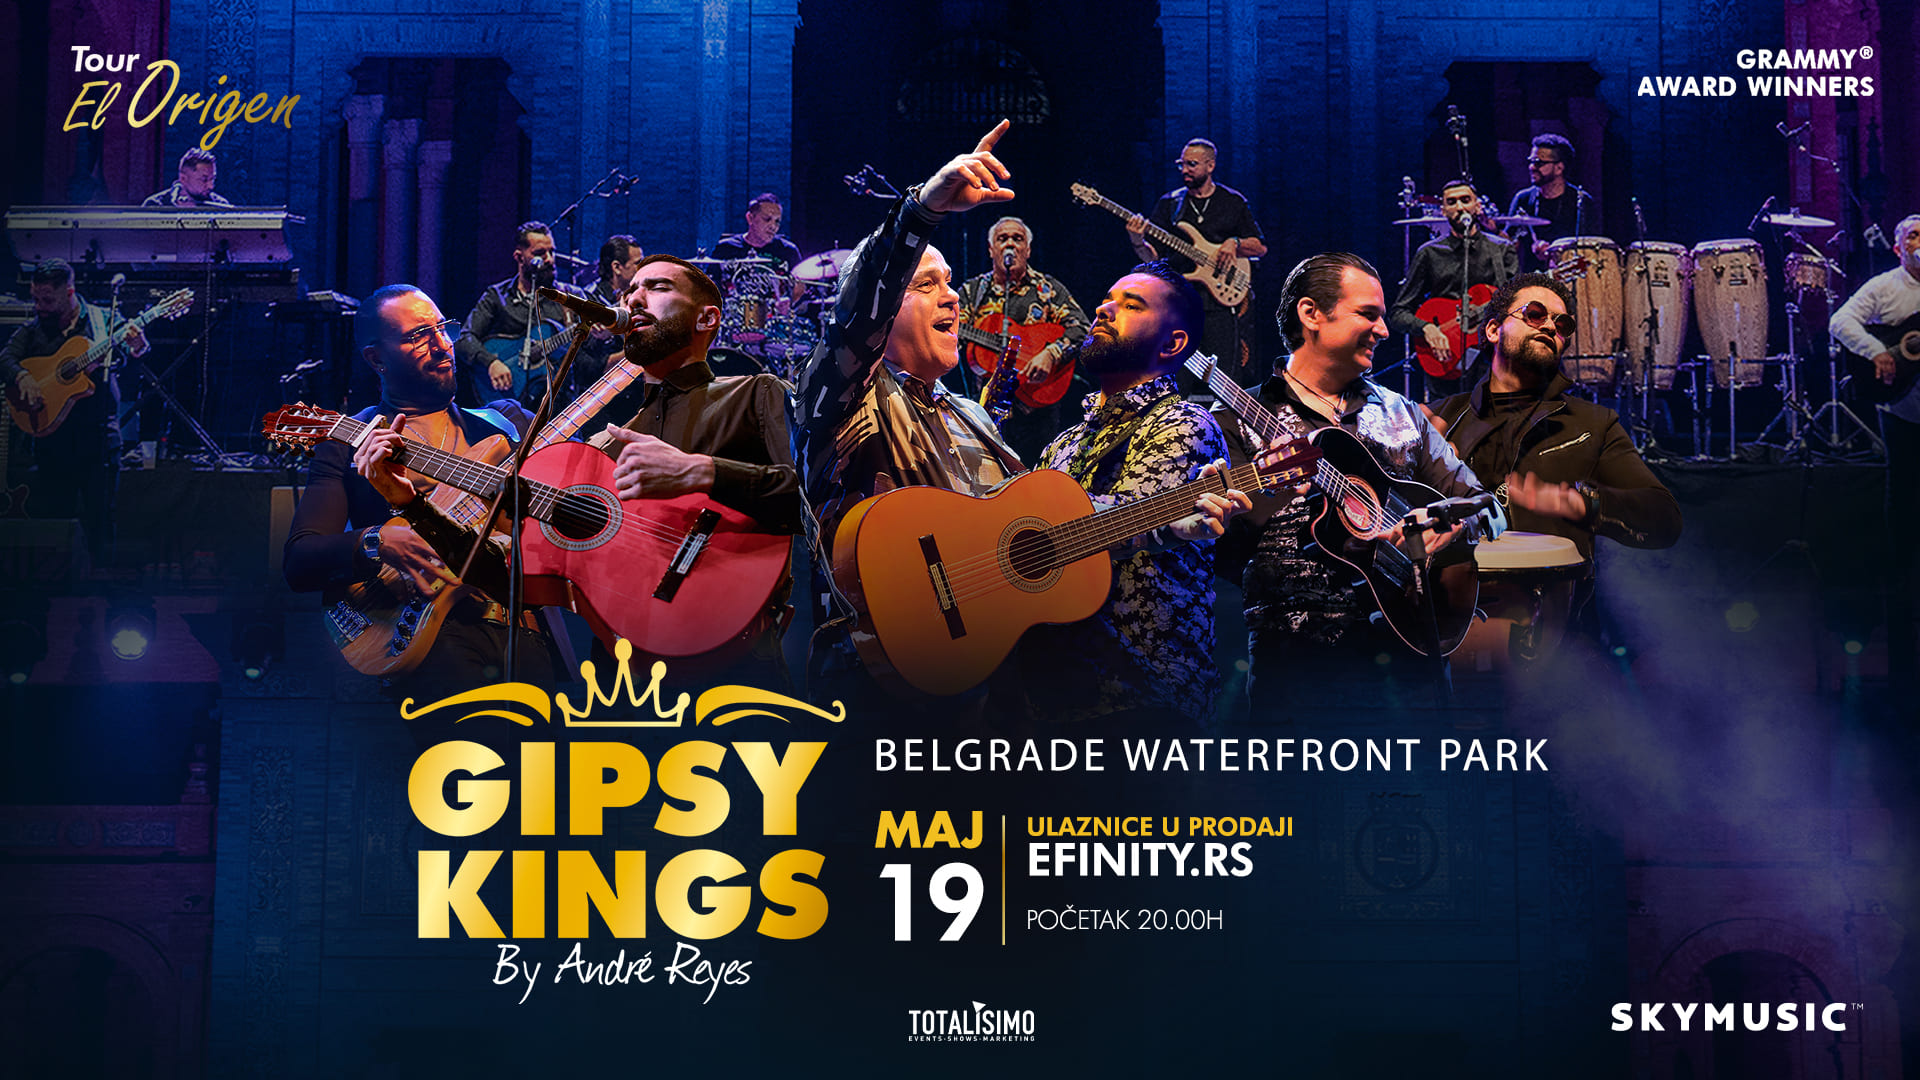  Musical spectacle organized by SKYMUSIC: Gipsy Kings by Andre Reyes in Belgrade on May 19!